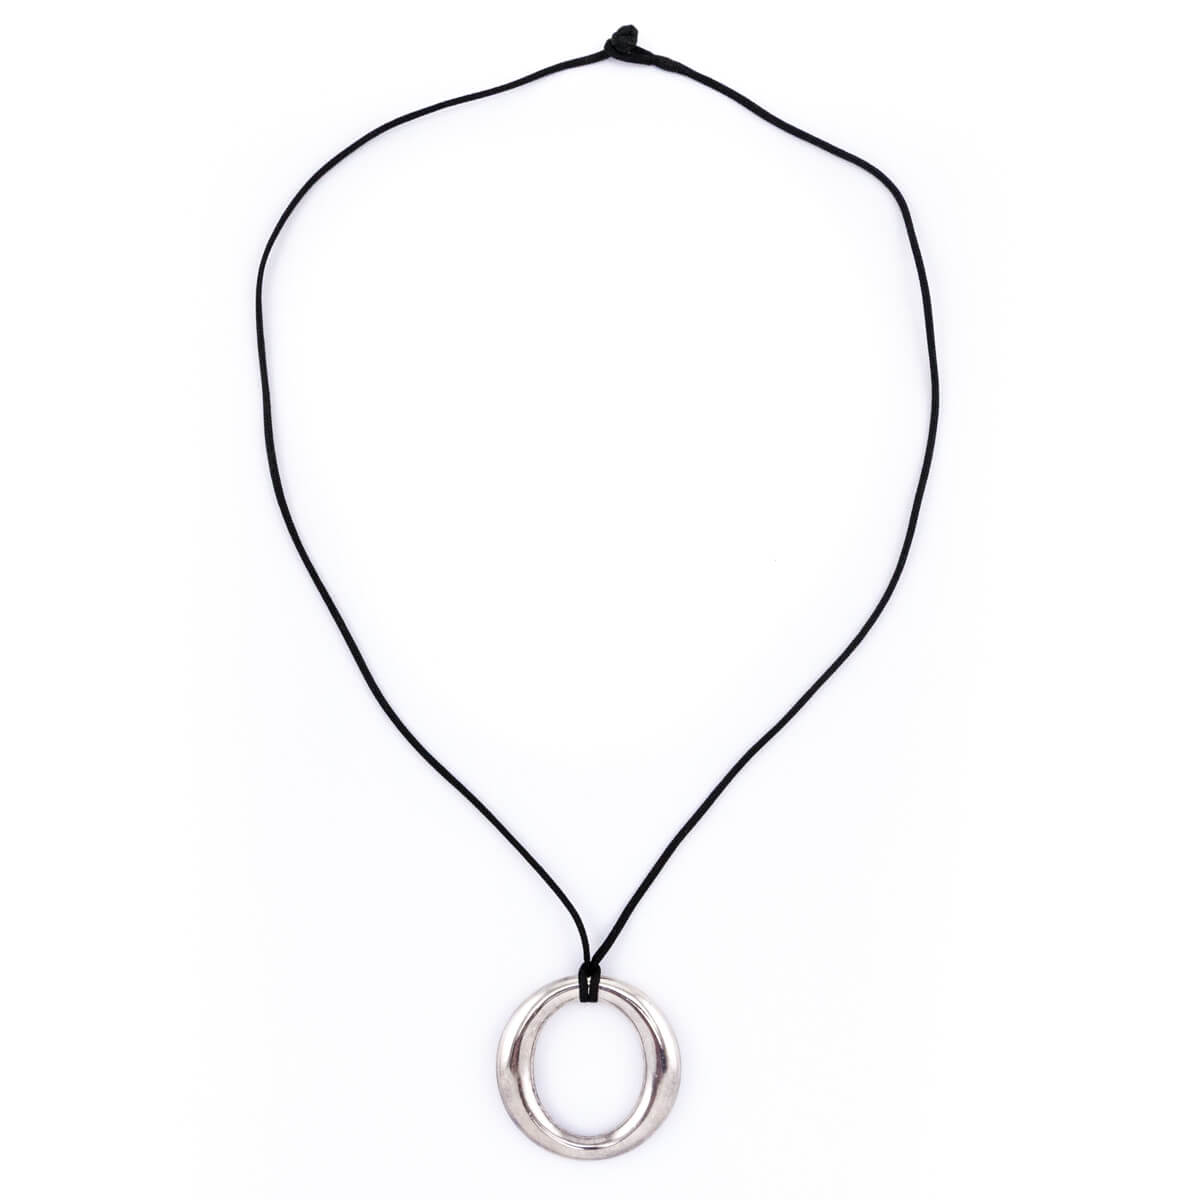 NEW Glass Circle Pendant & Black String Necklace 17.75 - Sterling Silver  Talana